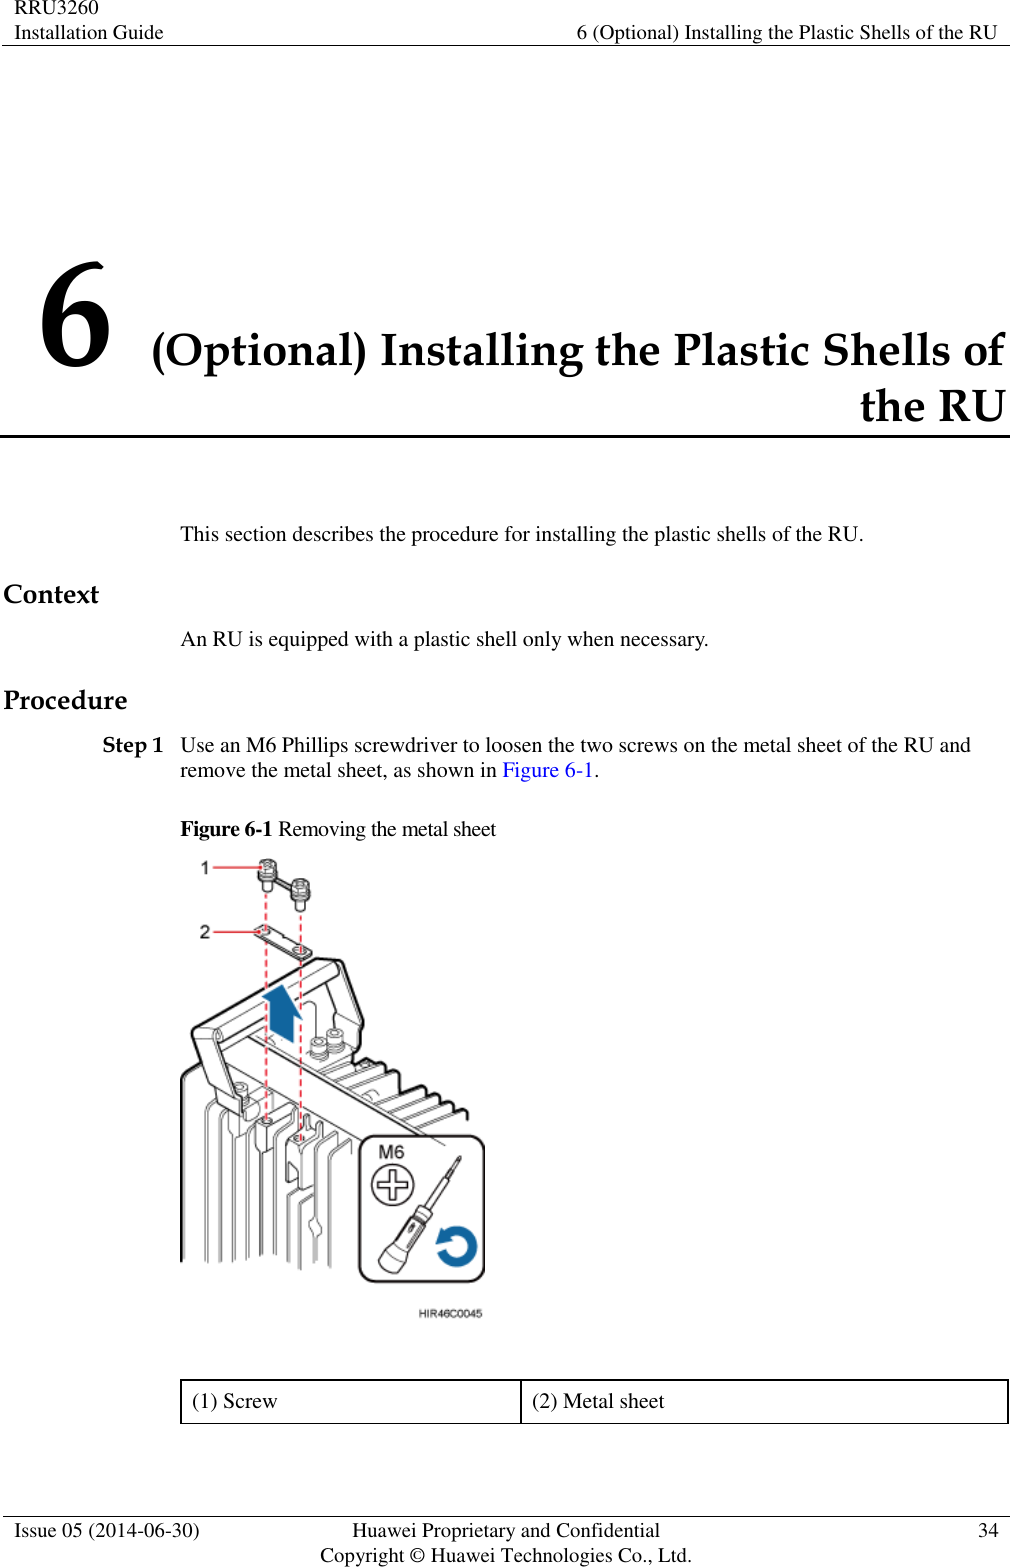 RRU3260 Installation Guide 6 (Optional) Installing the Plastic Shells of the RU  Issue 05 (2014-06-30) Huawei Proprietary and Confidential                                     Copyright © Huawei Technologies Co., Ltd. 34  6 (Optional) Installing the Plastic Shells of the RU This section describes the procedure for installing the plastic shells of the RU. Context An RU is equipped with a plastic shell only when necessary. Procedure Step 1 Use an M6 Phillips screwdriver to loosen the two screws on the metal sheet of the RU and remove the metal sheet, as shown in Figure 6-1. Figure 6-1 Removing the metal sheet   (1) Screw (2) Metal sheet 